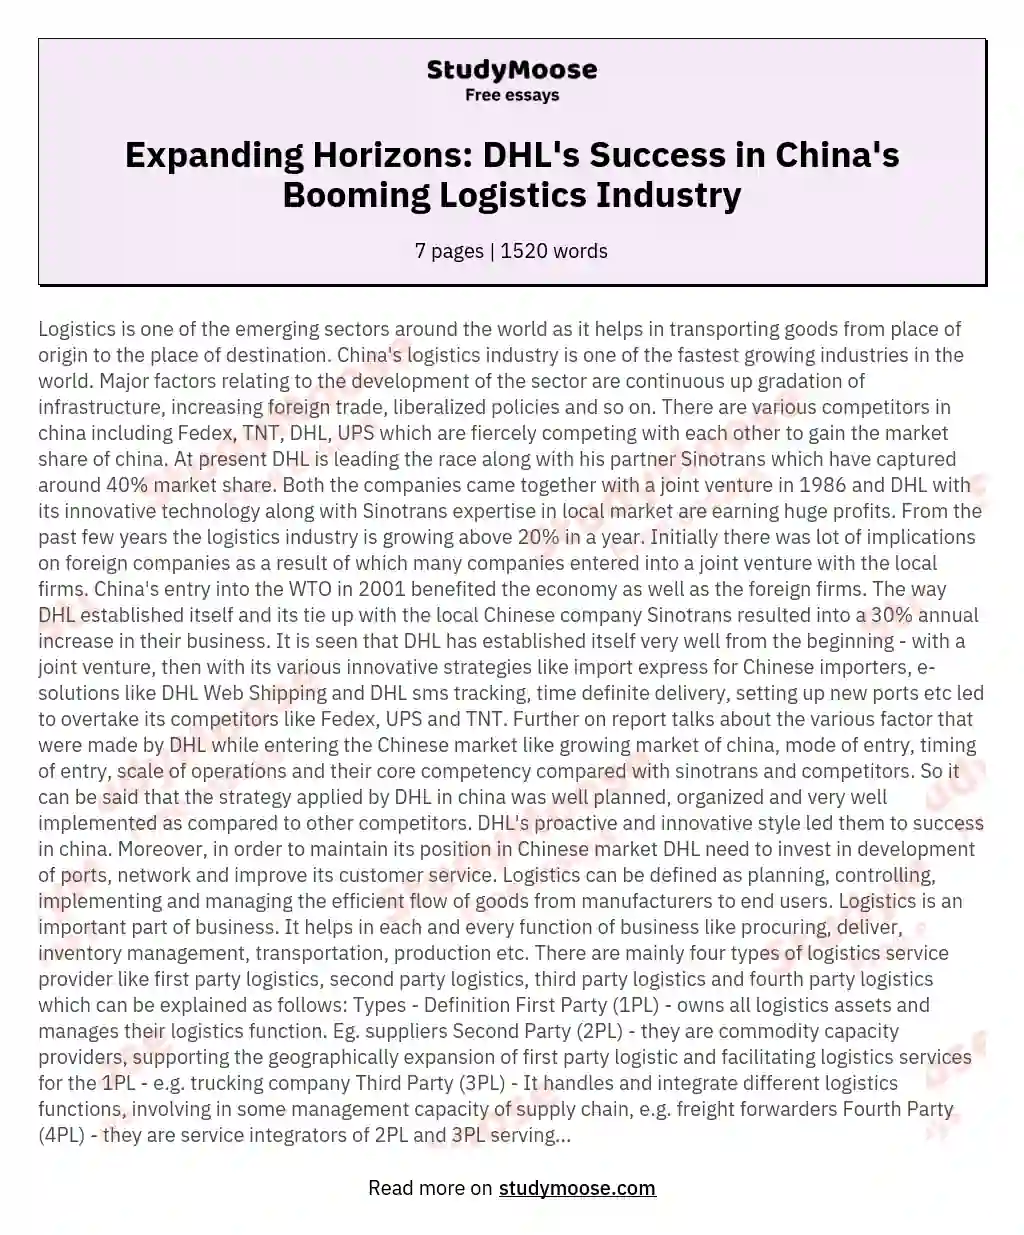 Expanding Horizons: DHL's Success in China's Booming Logistics Industry essay